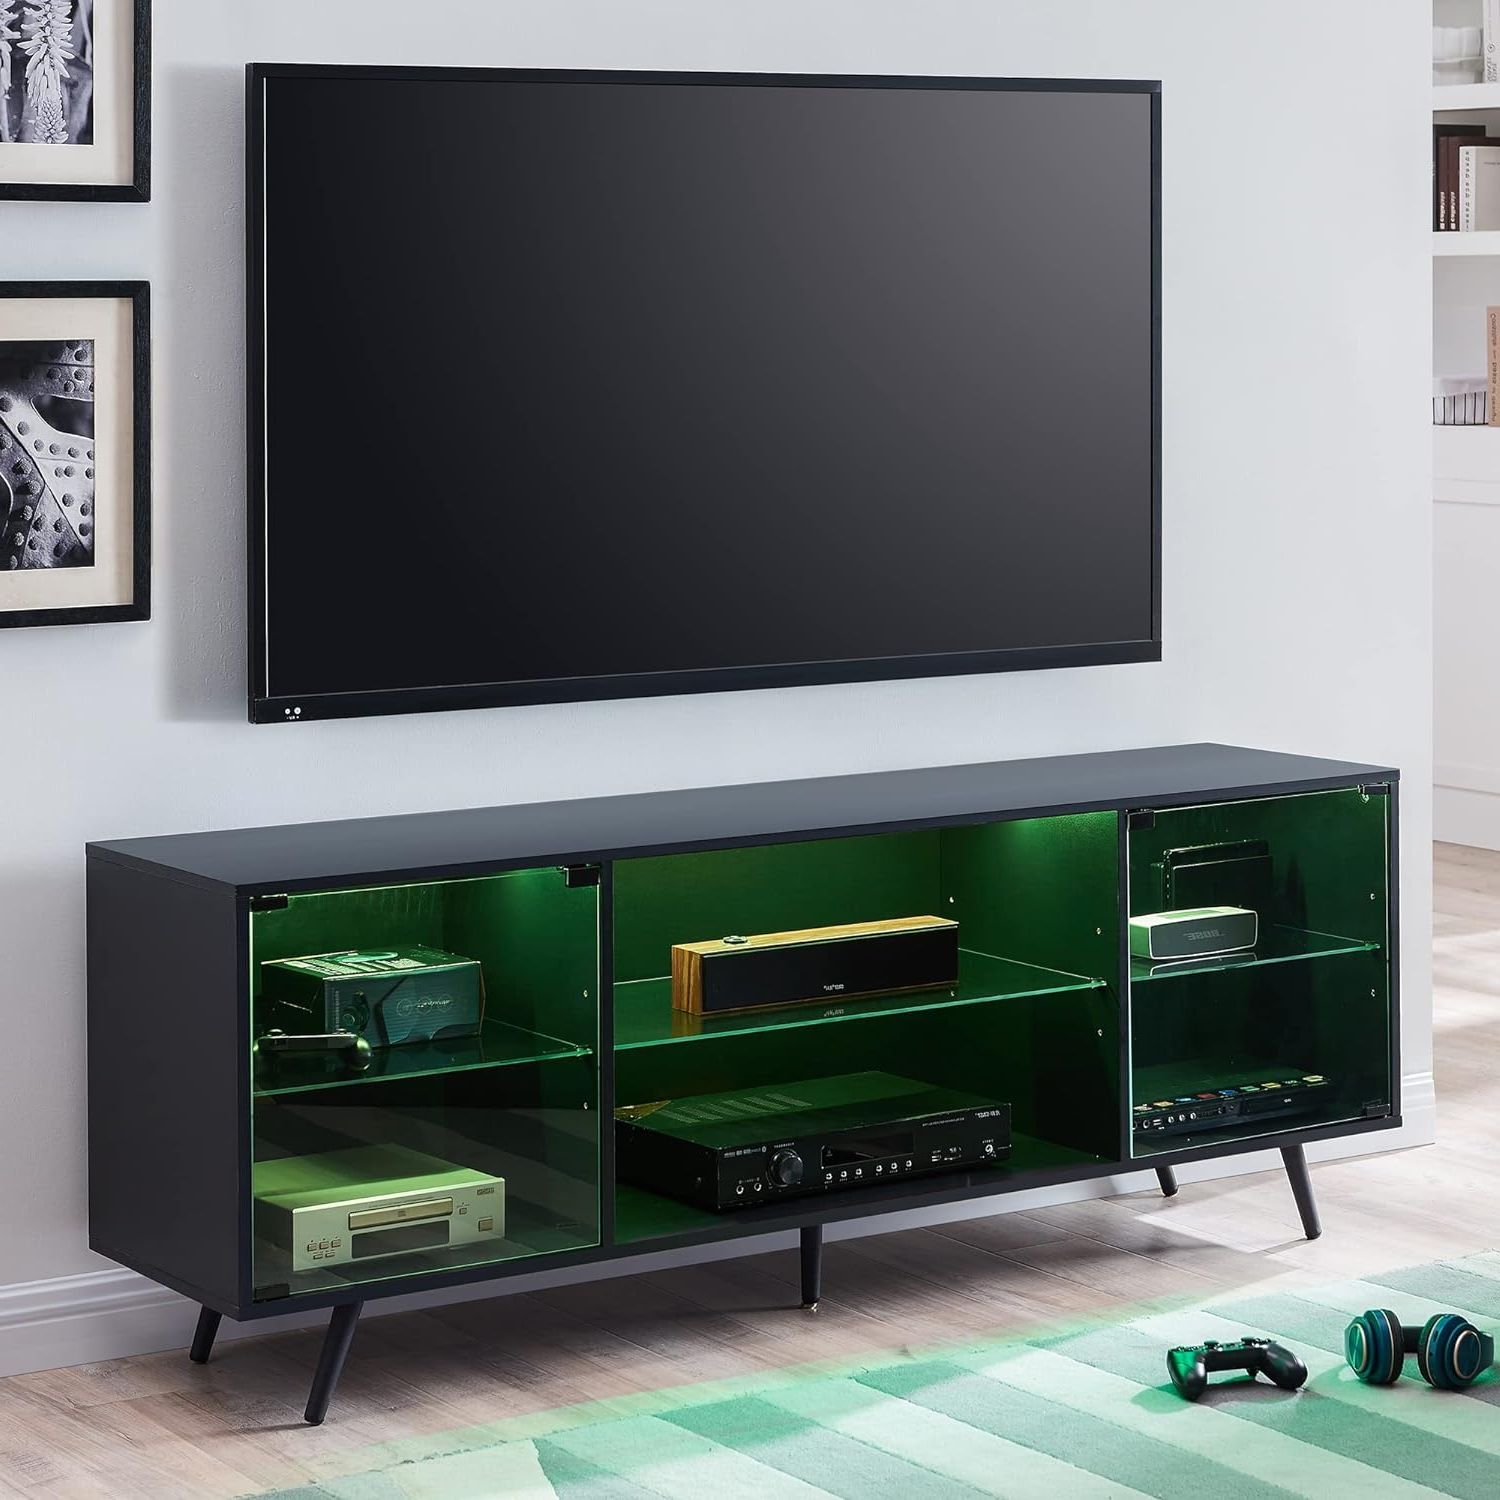 Buy Okd Modern Tv Stand For 75 Inch Tv With Led Lights, Gaming Regarding Widely Used Tv Stands With Lights (View 15 of 15)